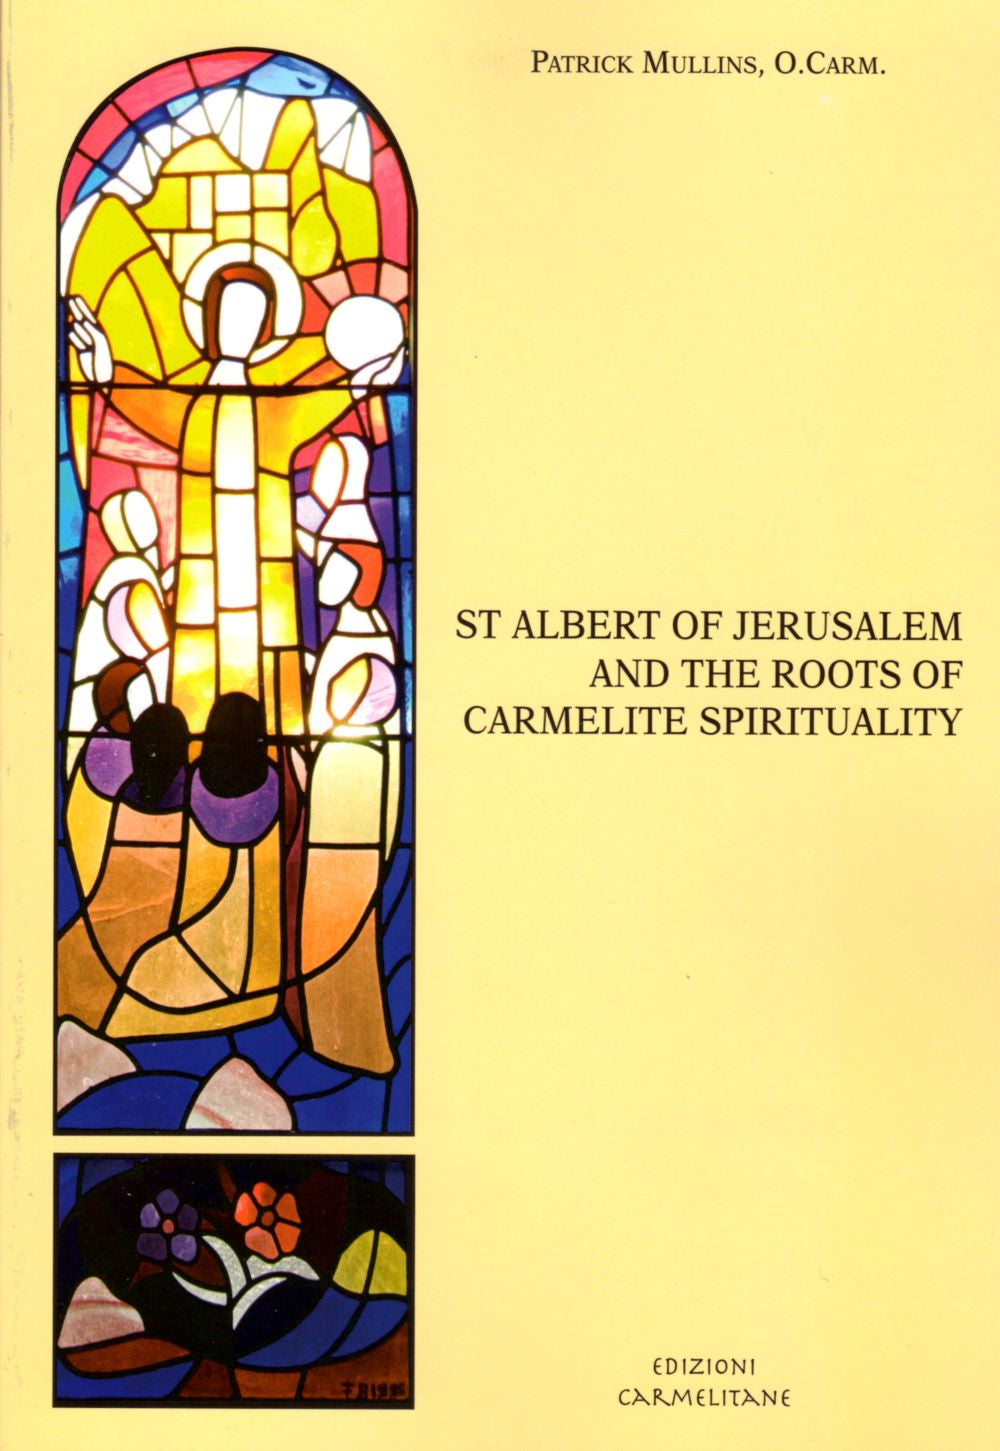 ST ALBERT OF JERUSALEM AND THE ROOTS OF CARMELITE SPIRITUALITY